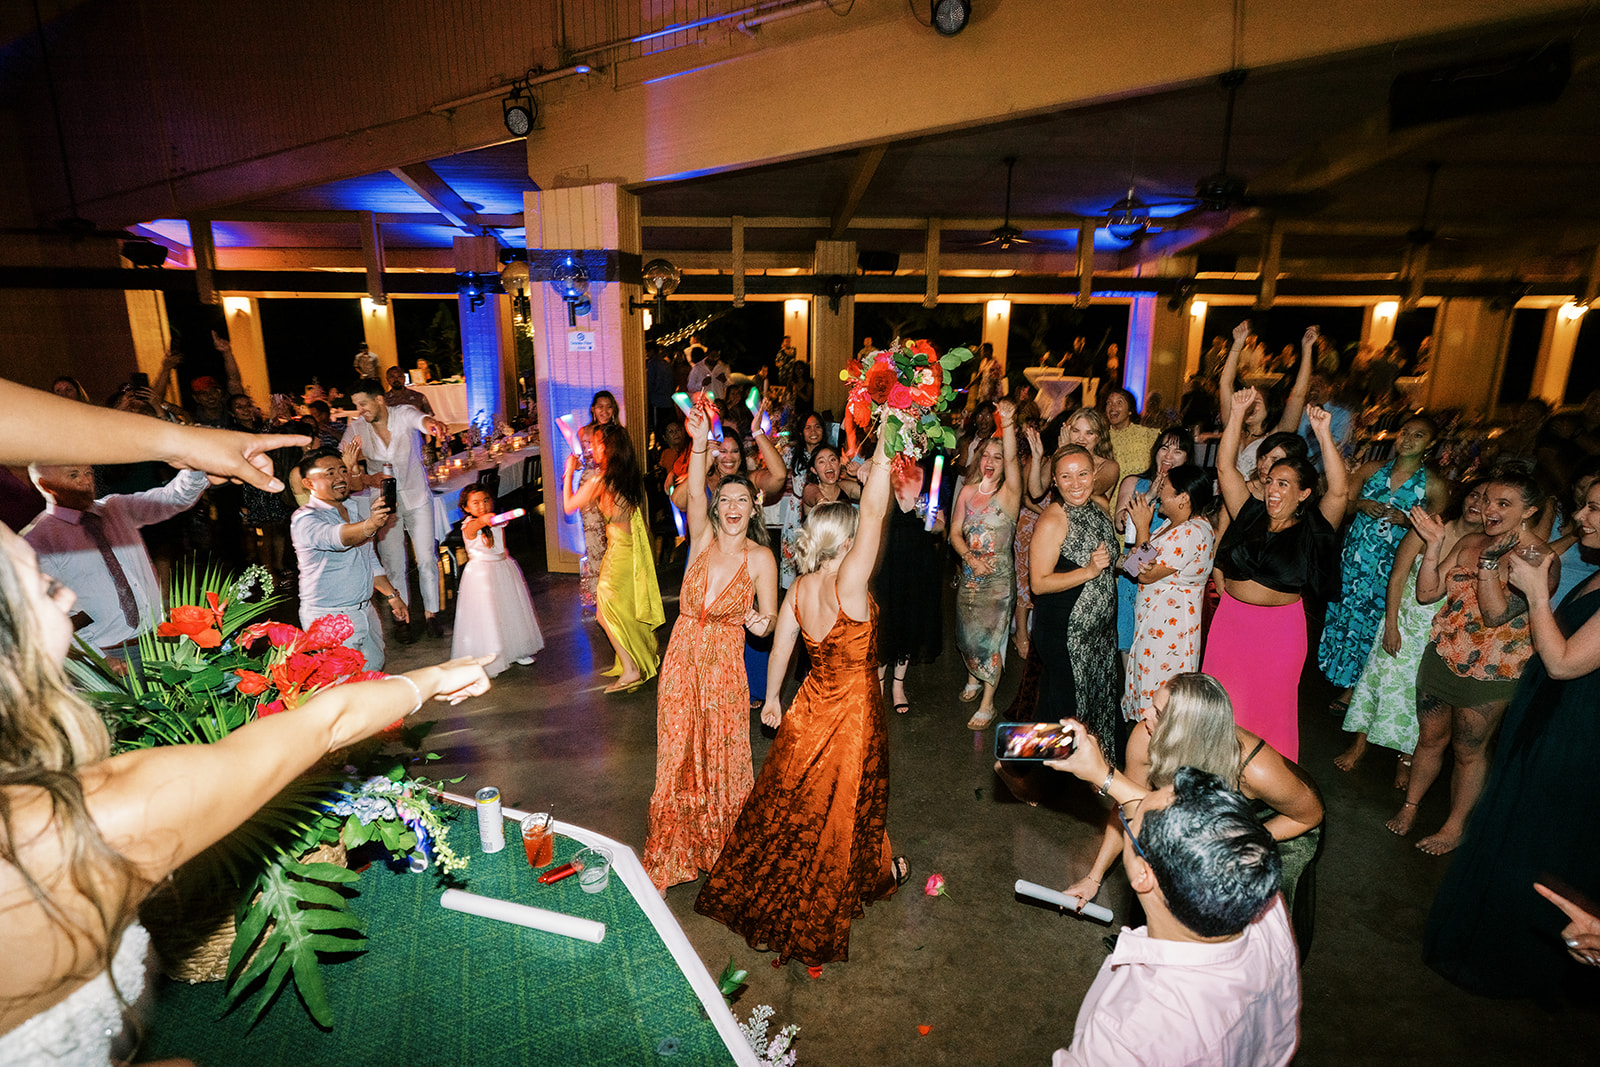 A lively bouquet toss at a wedding reception with guests excitedly reaching out in Smiths Tropical Paradise Luau